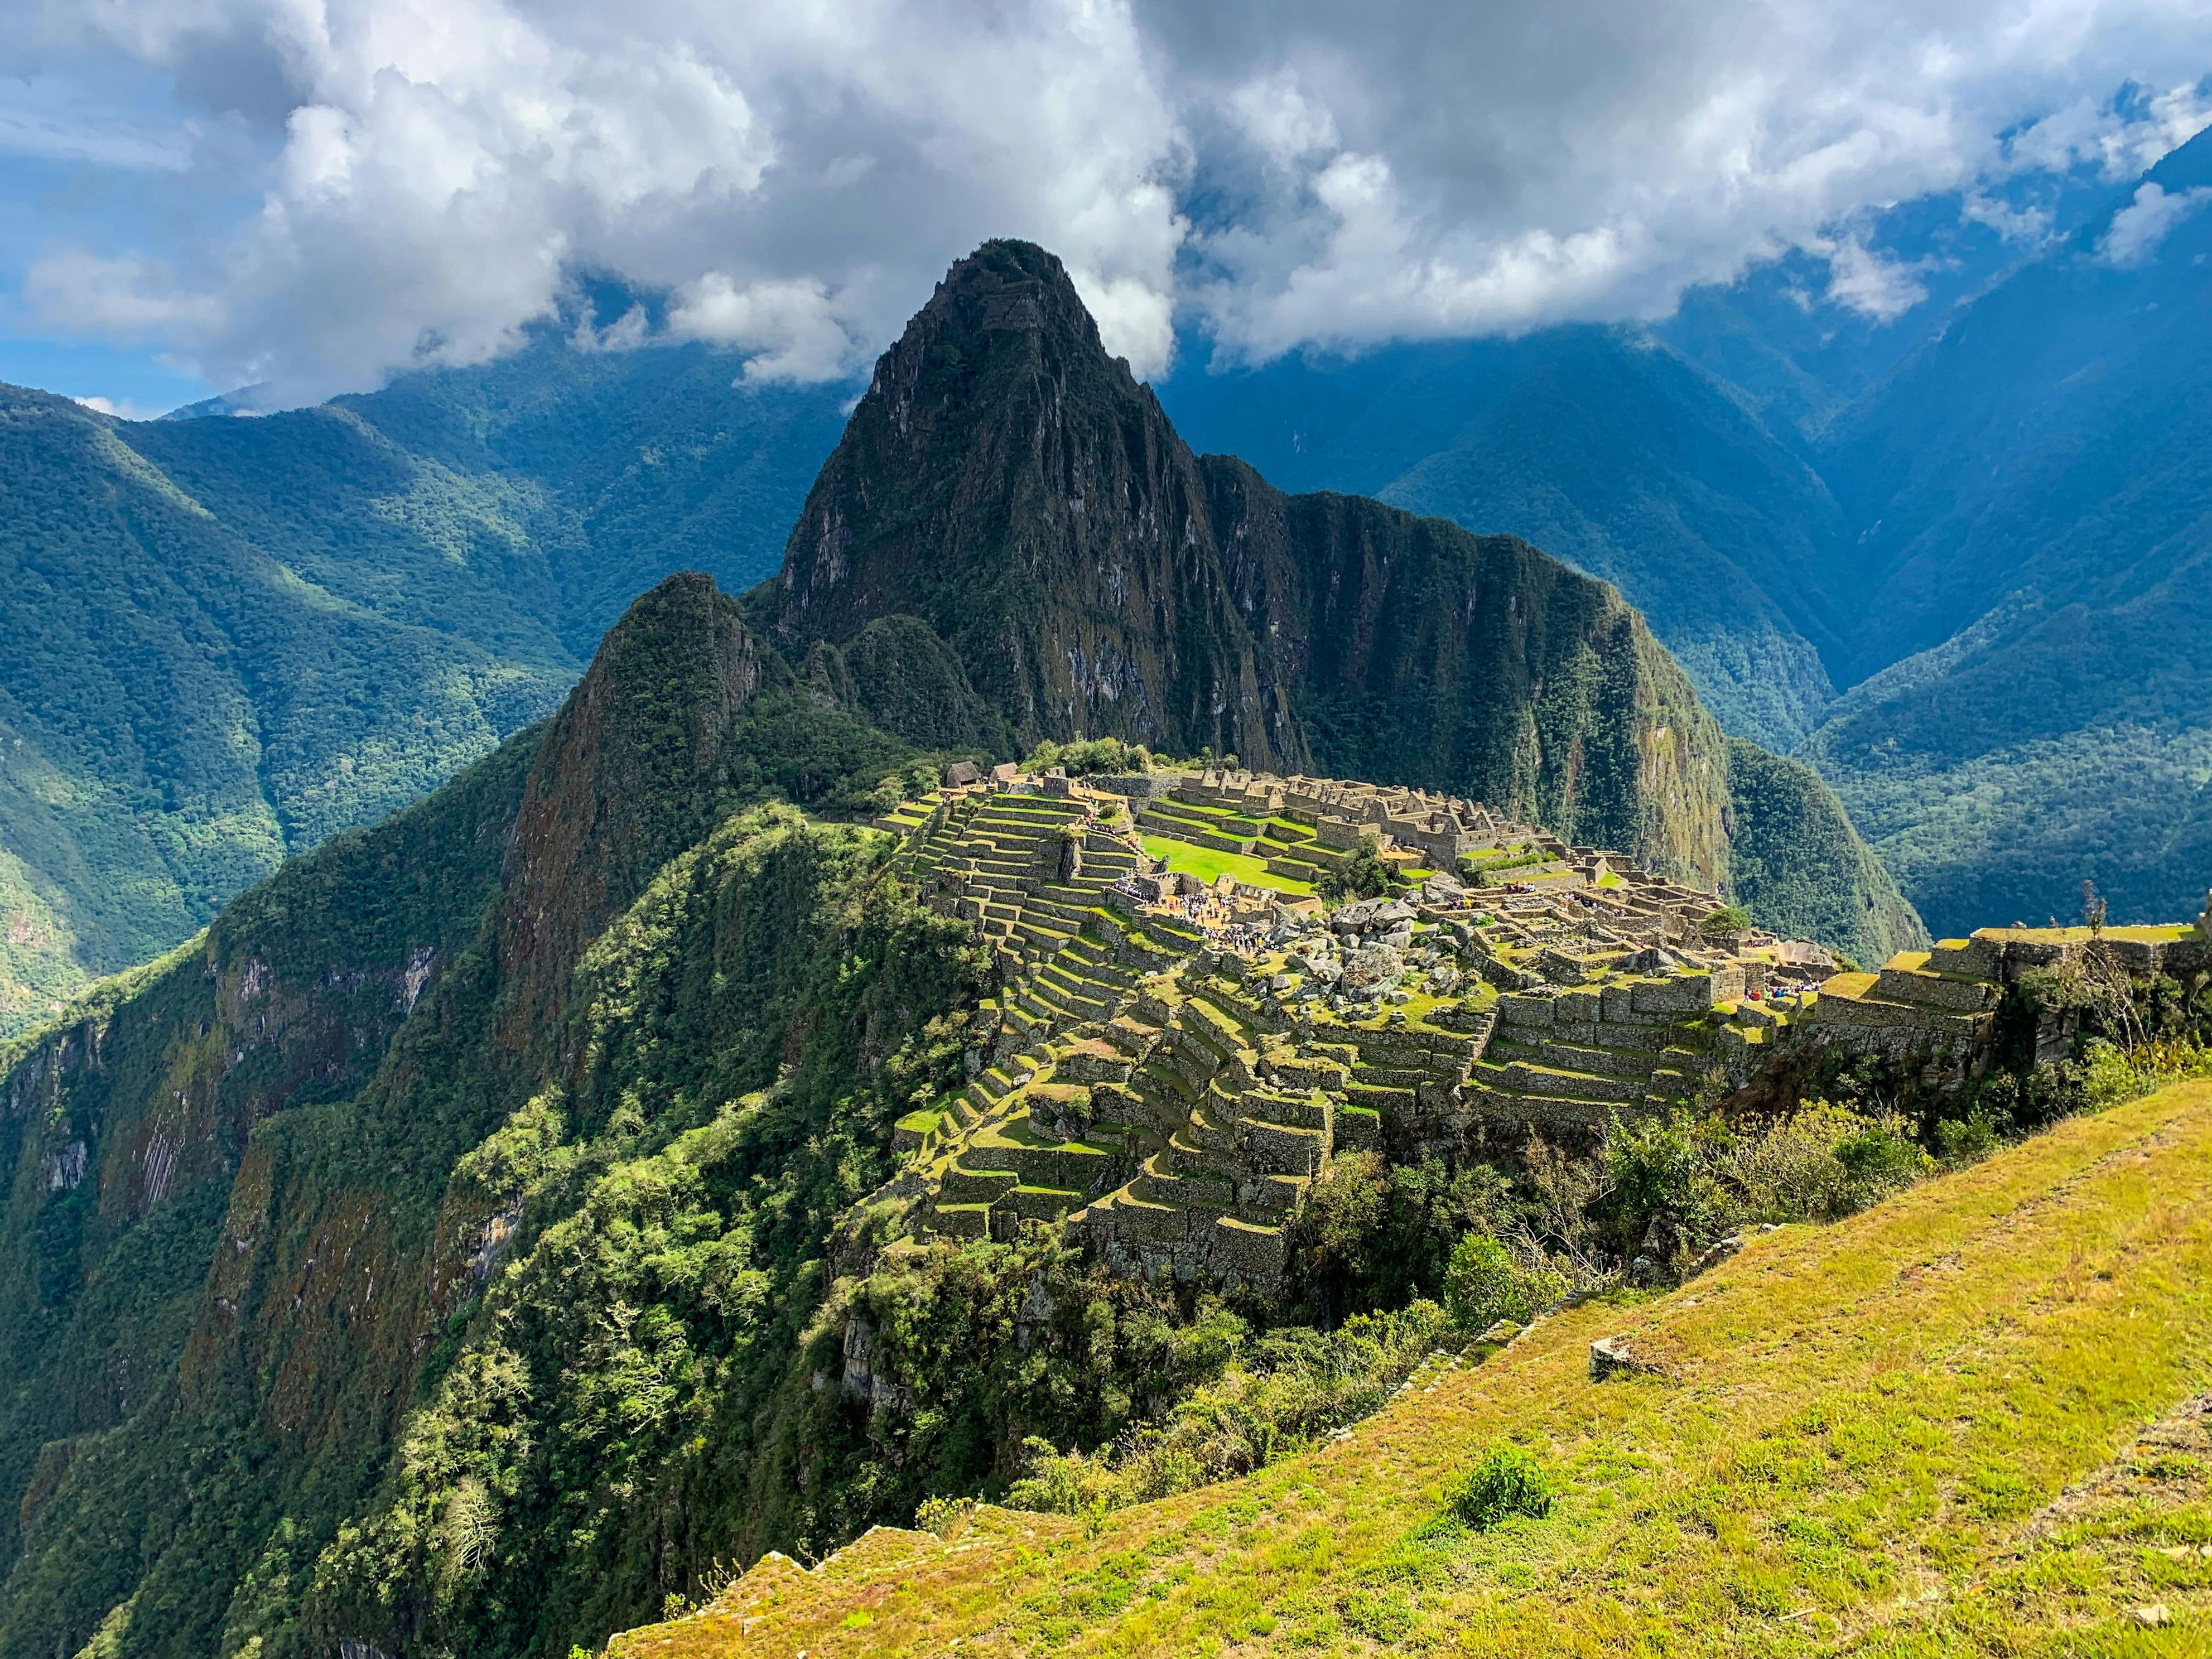 <h3>Machu Picchu, Peru</h3><p>Machu Picchu is one of the seven modern wonders of the world, and something you have to see to truly believe. To get there, fly into Lima and spend a few days in the coastal city. From there, take a domestic flight (1-2 hours) to Cuzco and begin making your way to the mountains. Getting around the small mountain towns of Peru is no joke, so I recommend joining a guided tour for ease. Stay overnight in a traditional hacienda to continue taking in the beauty of your surroundings, and consider extending your trip to visit the Rainbow Mountains.</p>